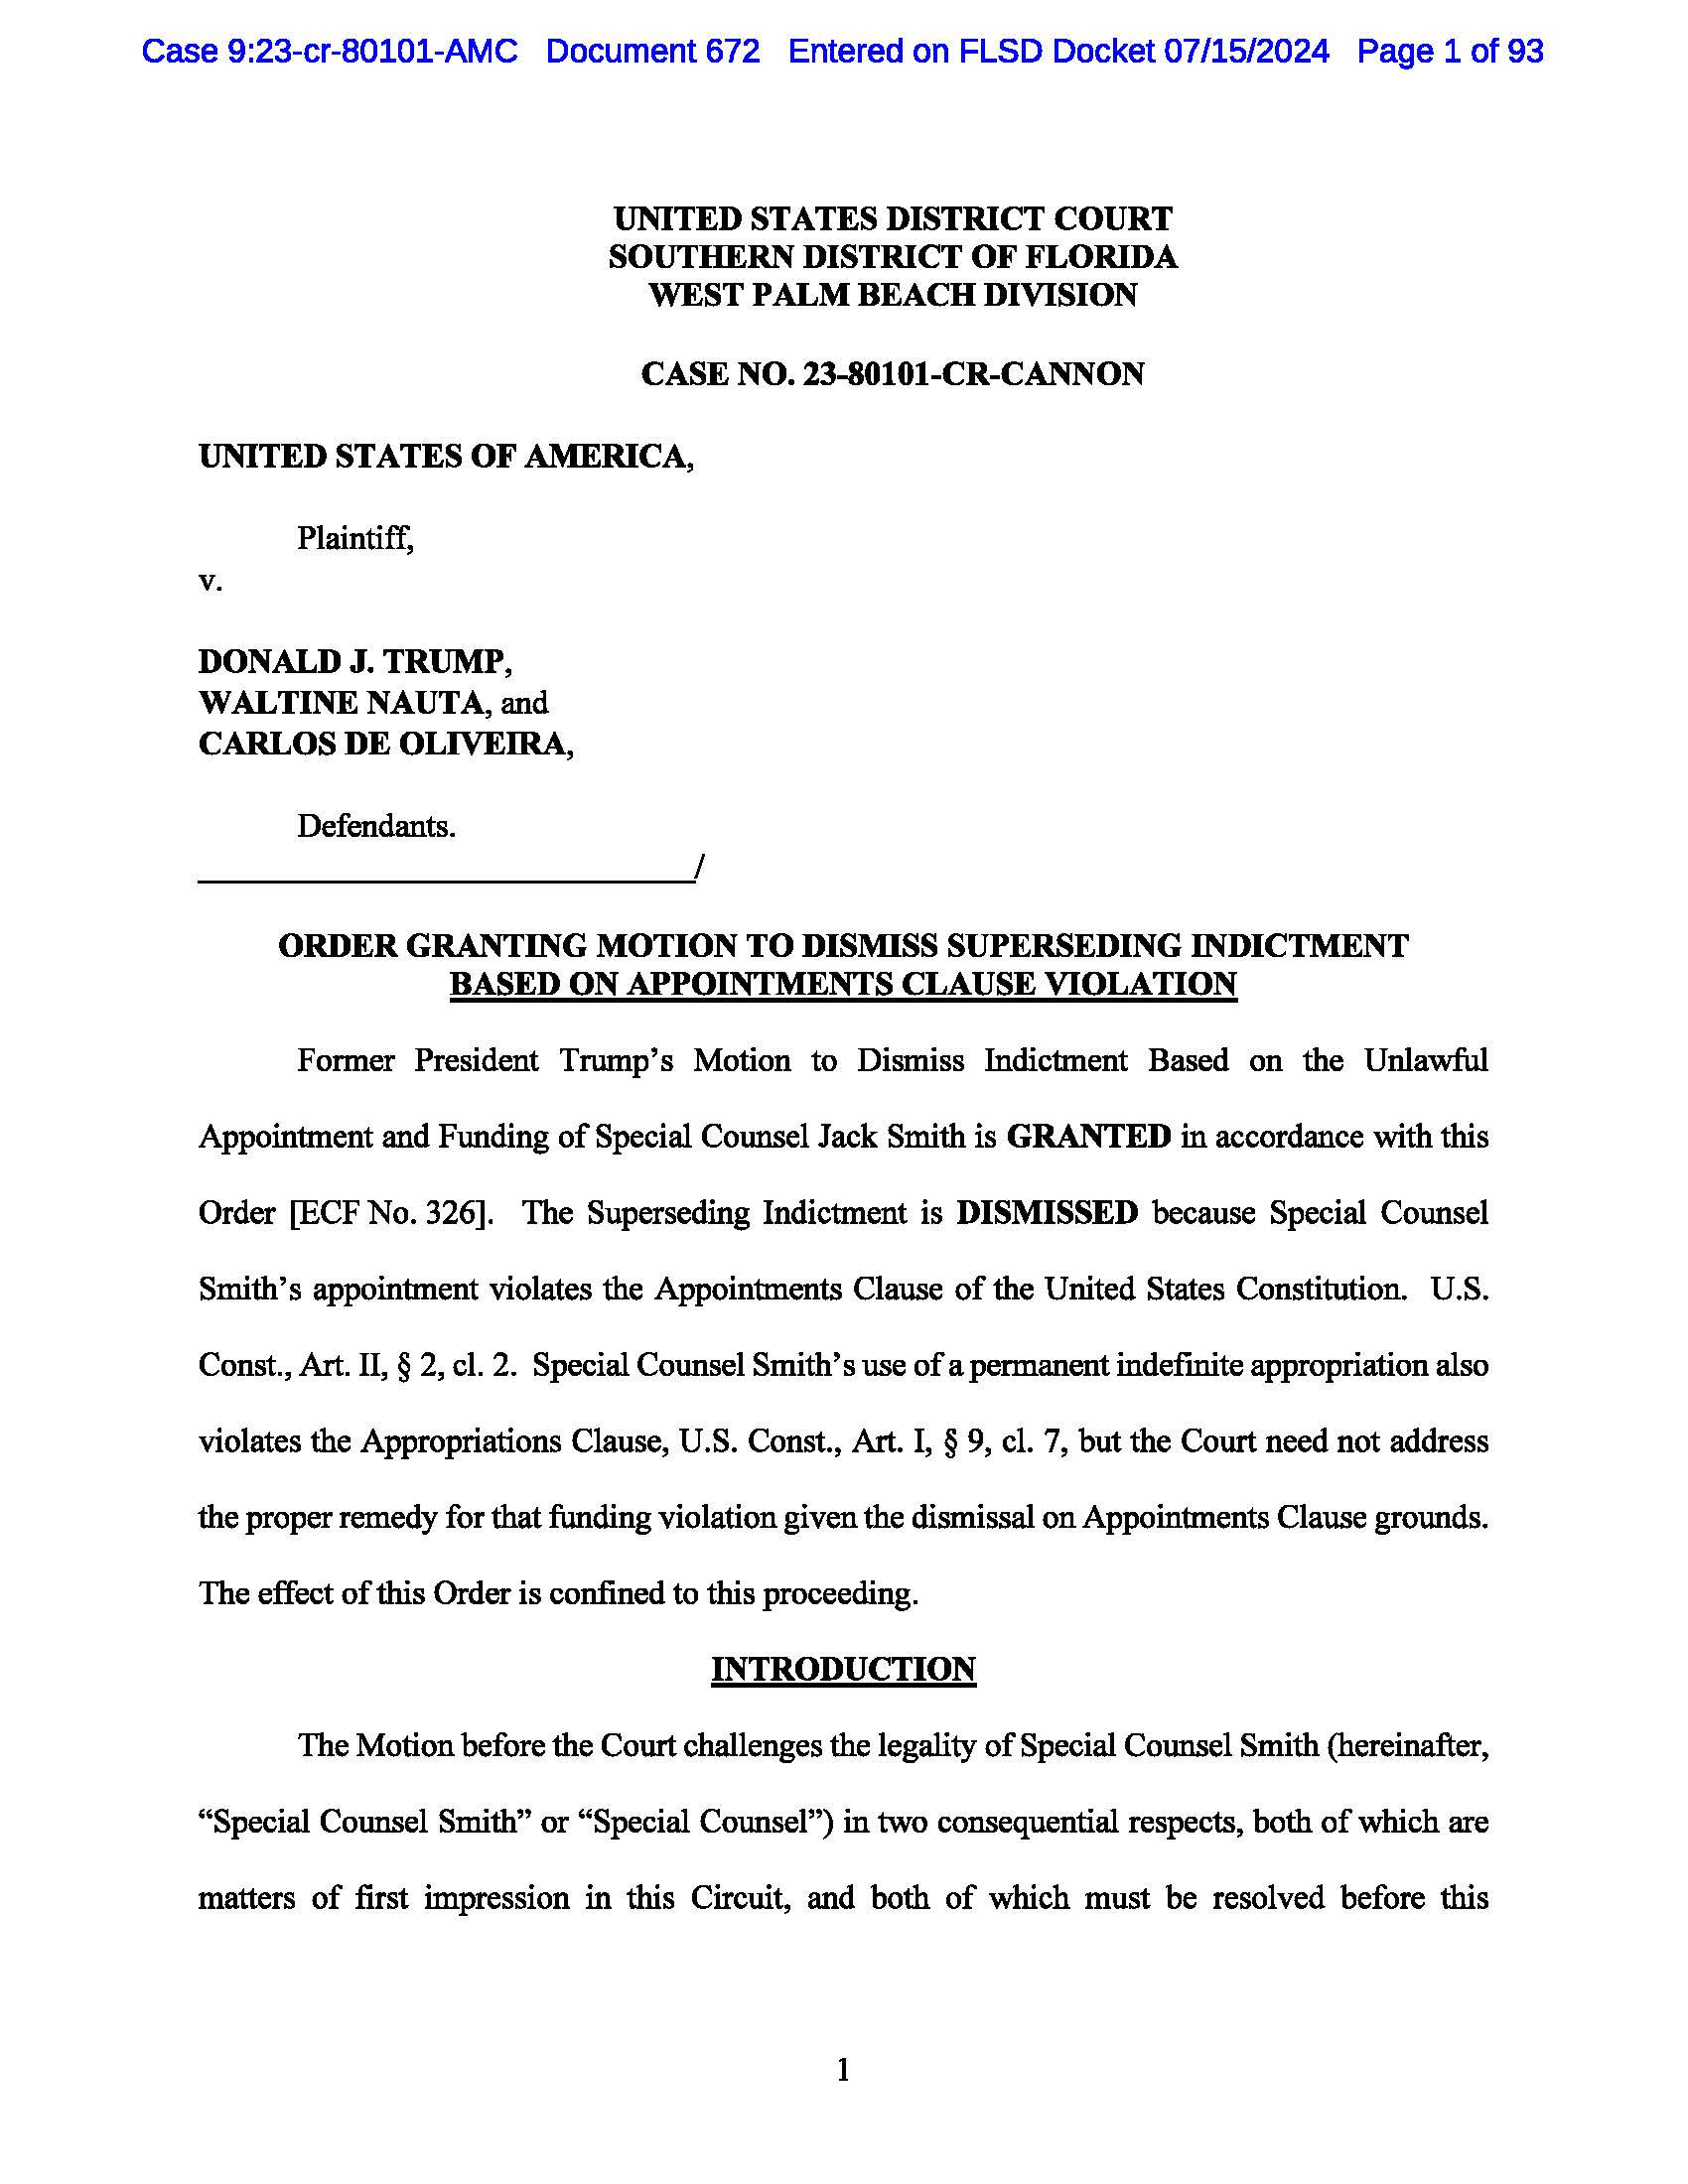 Legal ruling by Judge Aileen M. Cannon in the U.S. Governments prosecution of Fromer President Trump’s classified documents case